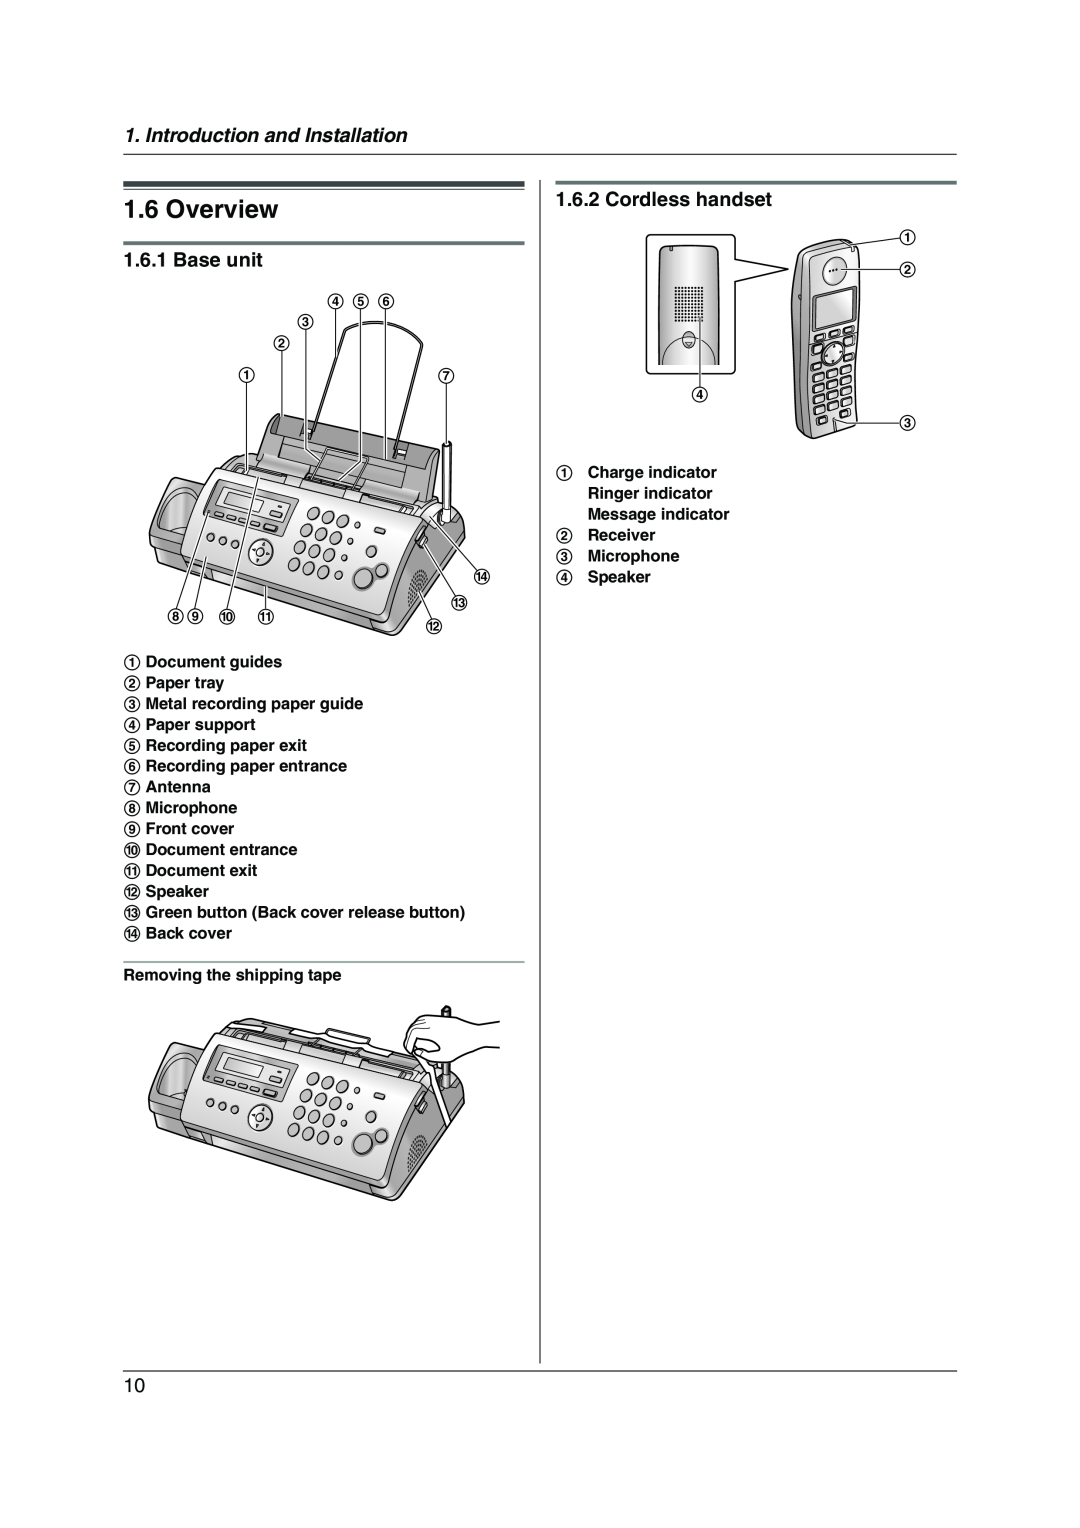 Panasonic KX-FC228HK operating instructions Overview, Base unit, Cordless handset, Introduction and Installation, 89 j 